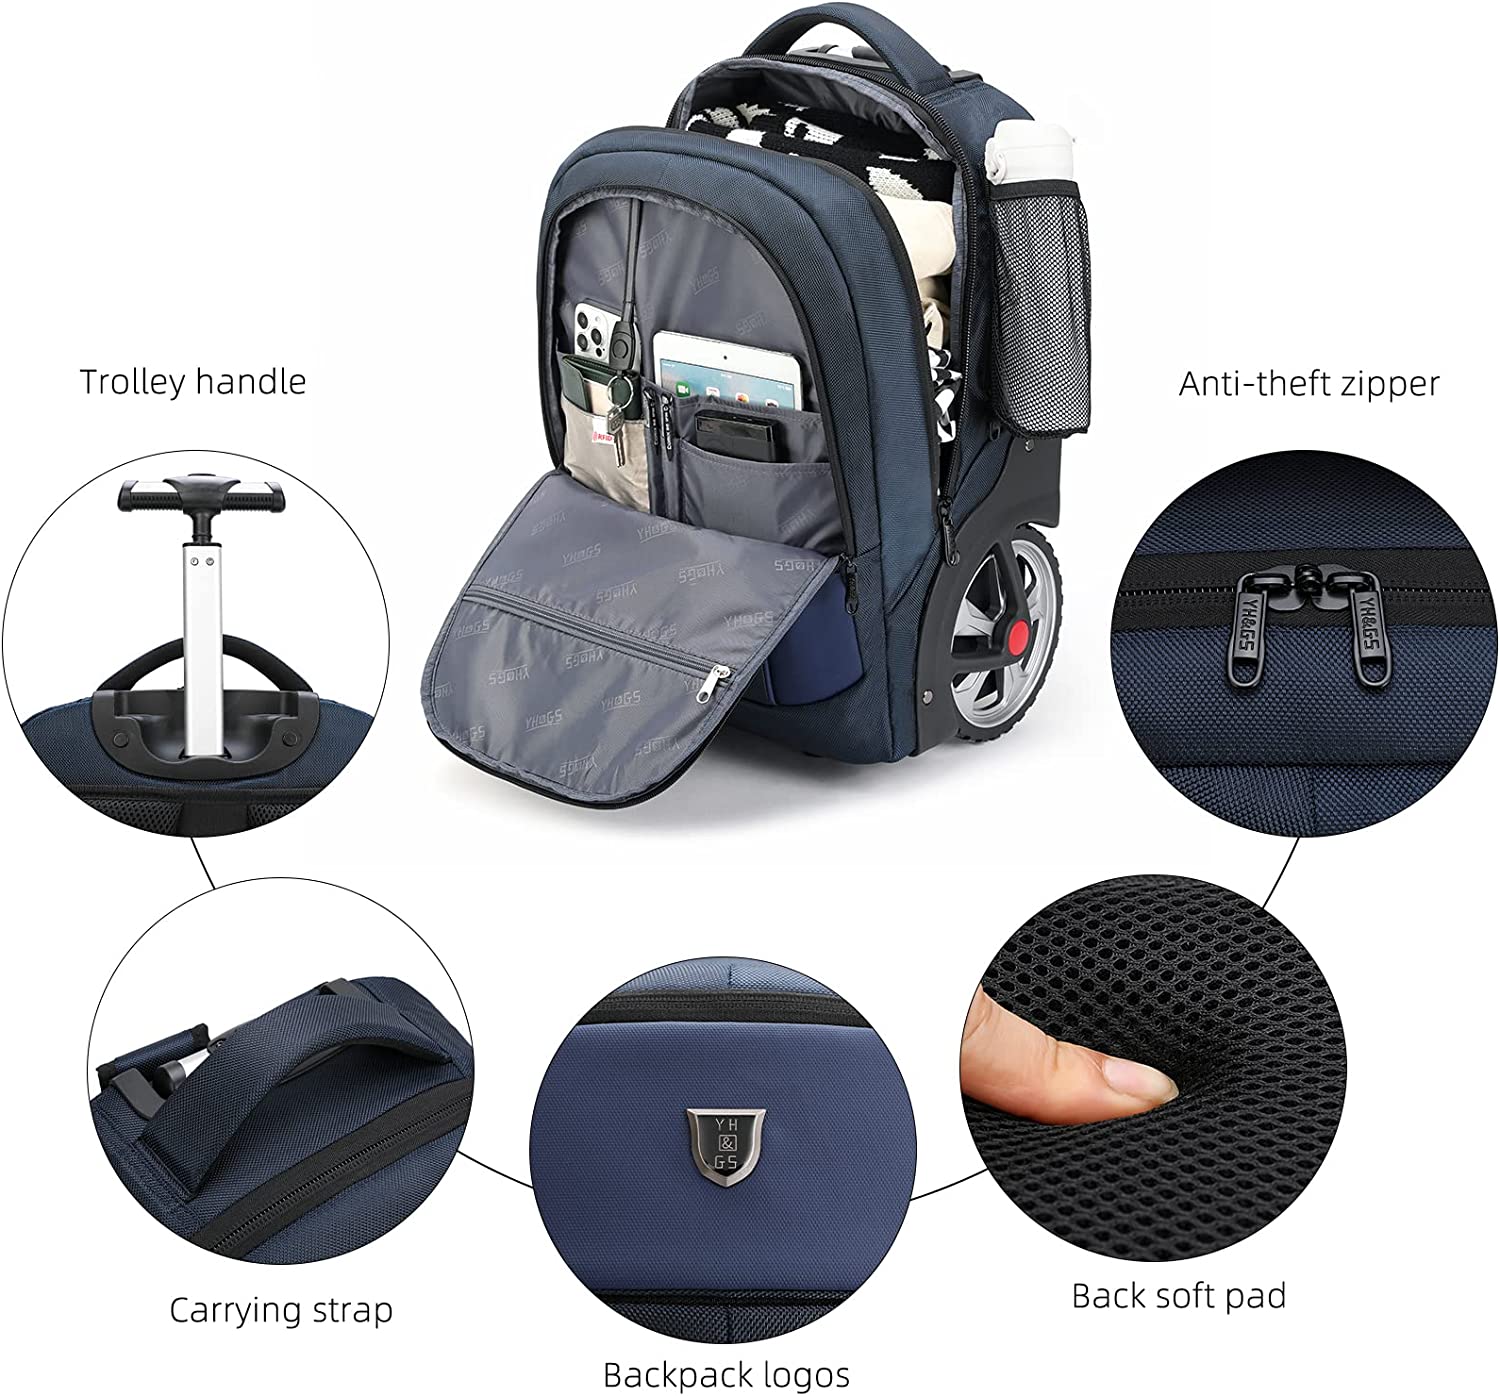 EAHKGmh Wheeled Rolling Laptop Backpack, 20-inch Student Laptop Backpack  for School Or College Trolley Luggage Bags Business Travel Backpack 